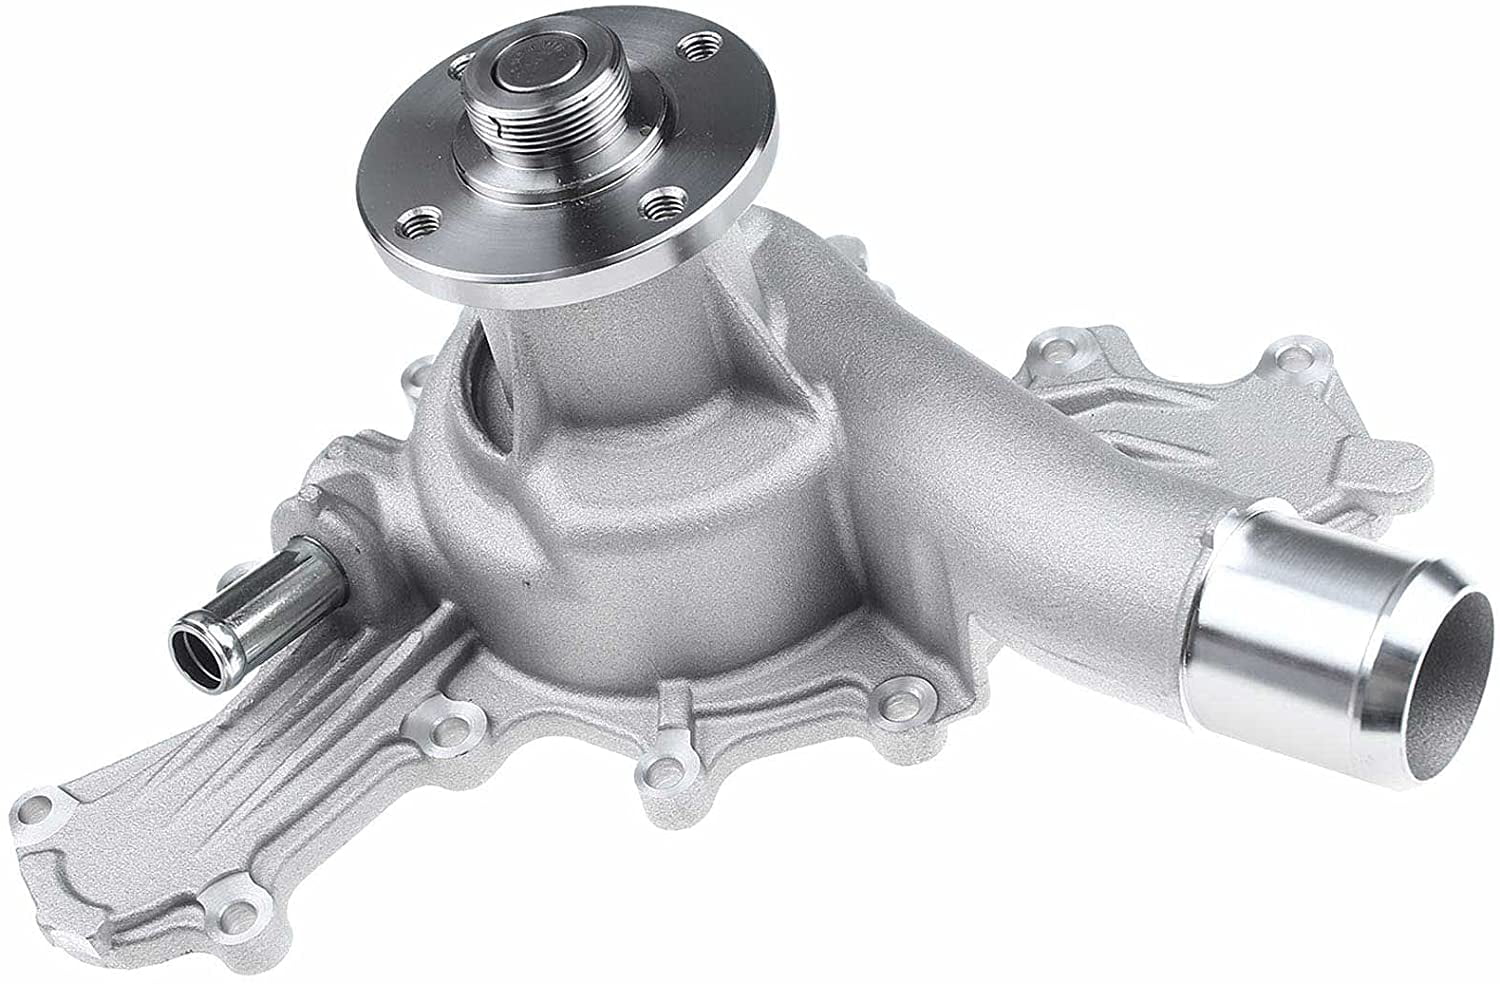 A-Premium Engine Water Pump Compatible with Ford Explorer Sport Trac 2001-2005 2007-2010 Mustang Ranger Mazda B4000 Mercury Mountaineer 1998-2010 V6 4.0L 